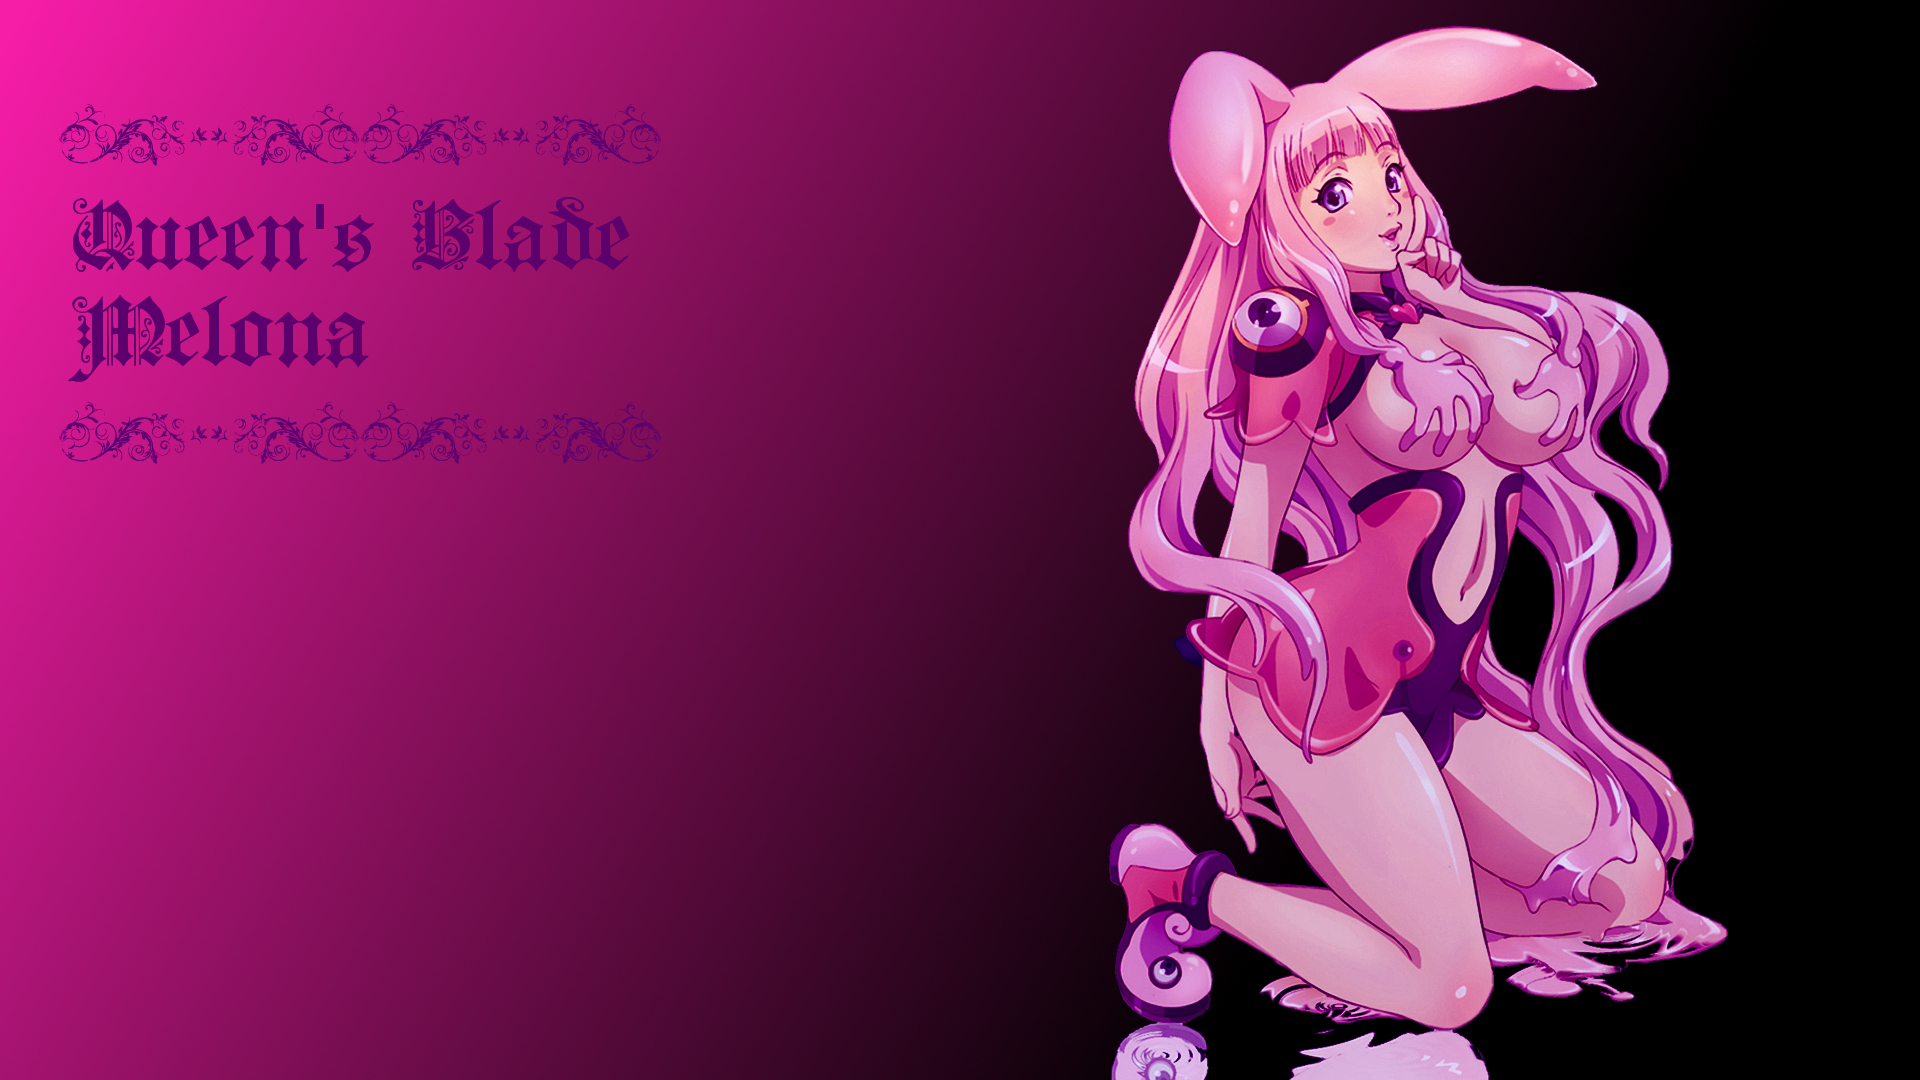 Download High quality Queens blade wallpaper / Anime / 1920x1080